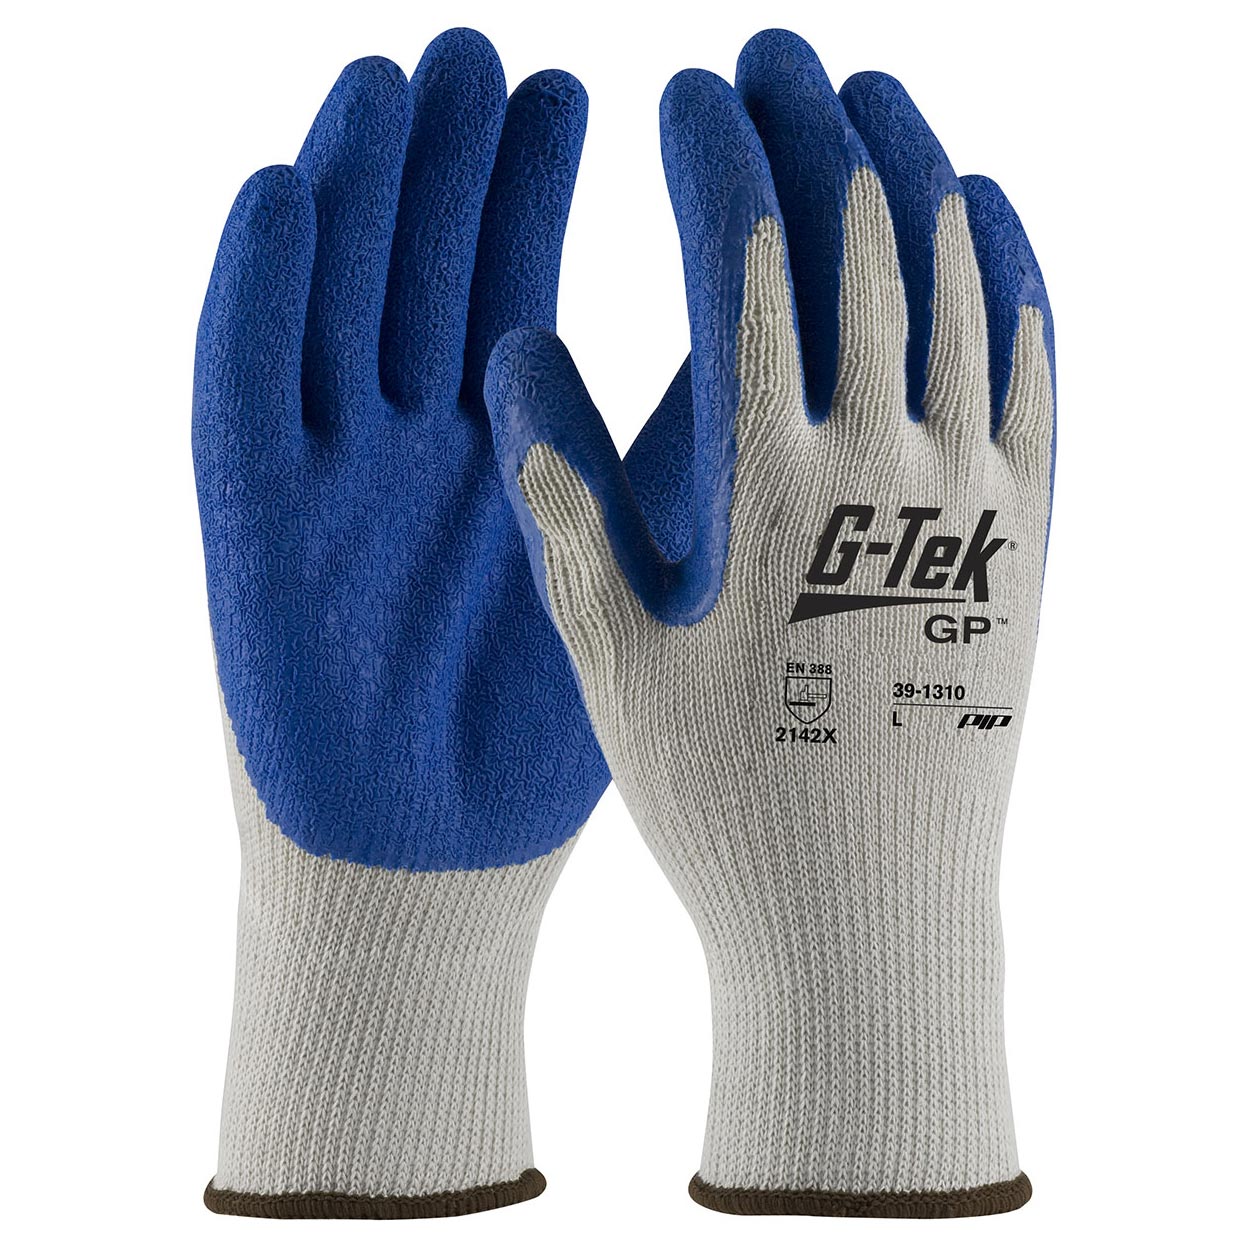 PIP 39-1310 G-Tek GP Economy Grade Seamless Knit Cotton/Polyester Gloves - Latex Coated Crinkle Grip (DZ)-eSafety Supplies, Inc